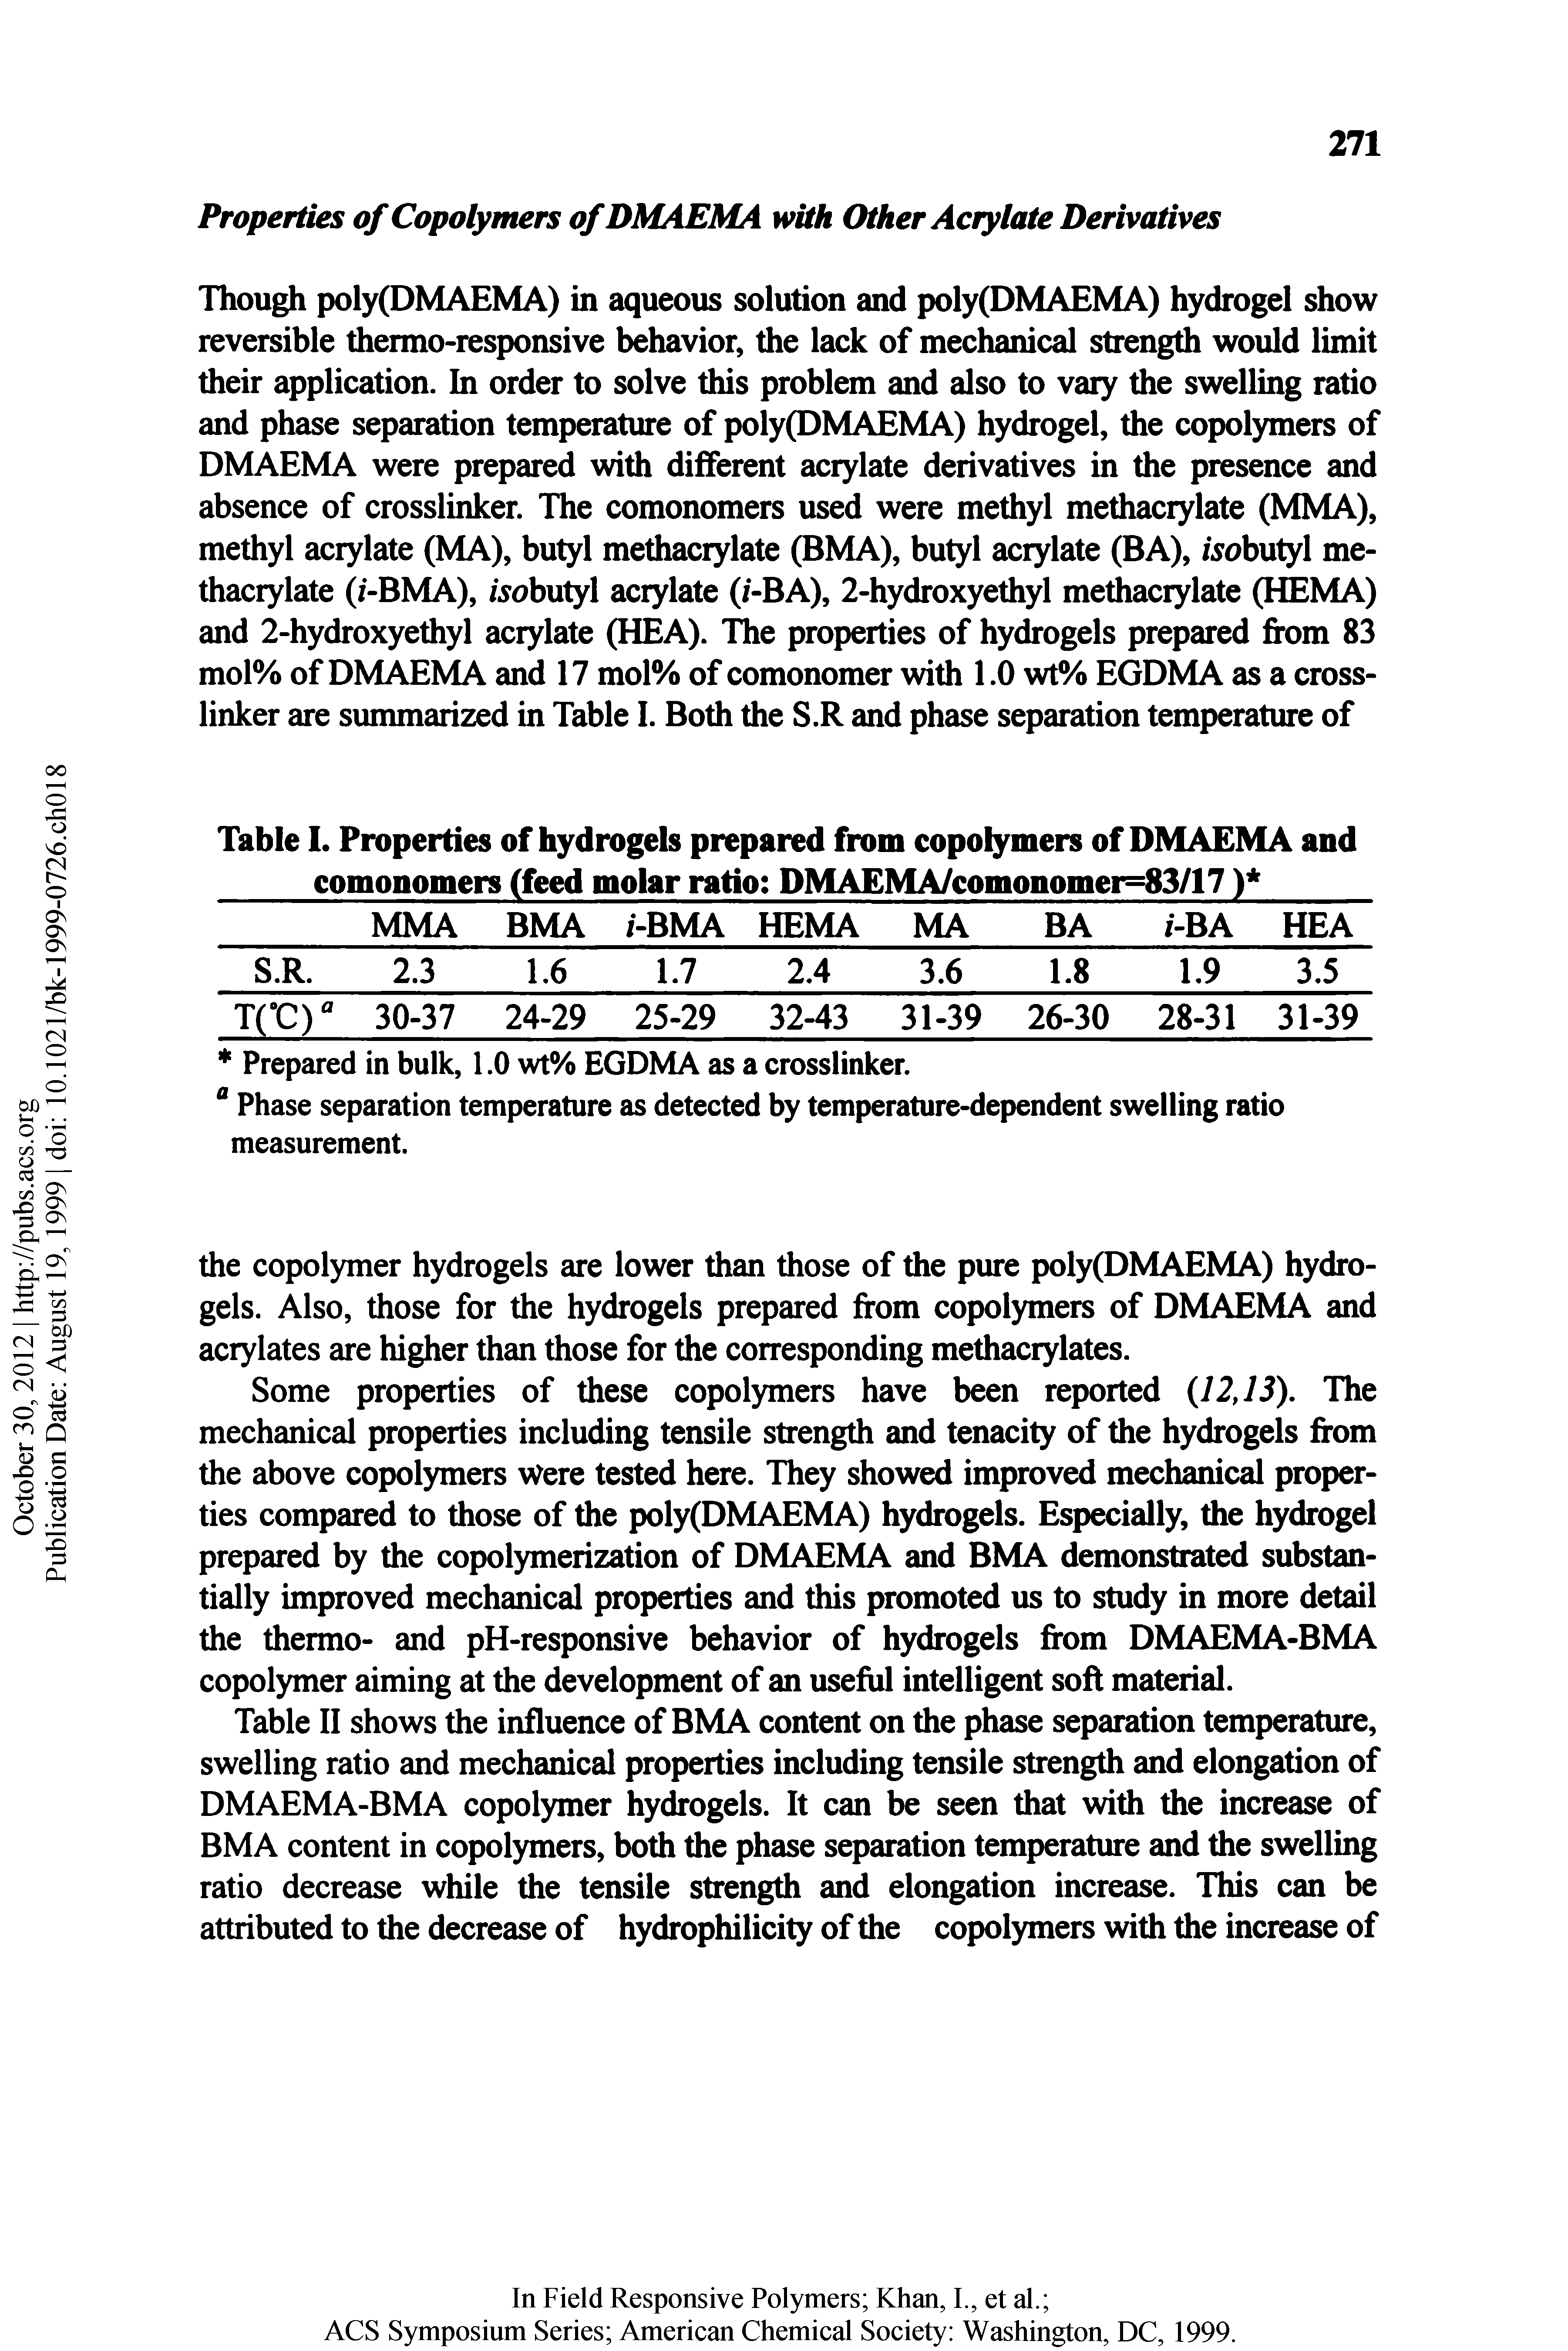 Table II shows the influence of BMA content on the phase separation temperature, swelling ratio and mechanical properties including tensile strength and elongation of DMAEMA-BMA copolymer hydrogels. It can be seen that with the increase of BMA content in copolymers, both the phase separation temperature and the swelling ratio decrease while the tensile strength and elongation increase. This can be attributed to the decrease of hydrophilicity of the copolymers with the increase of...